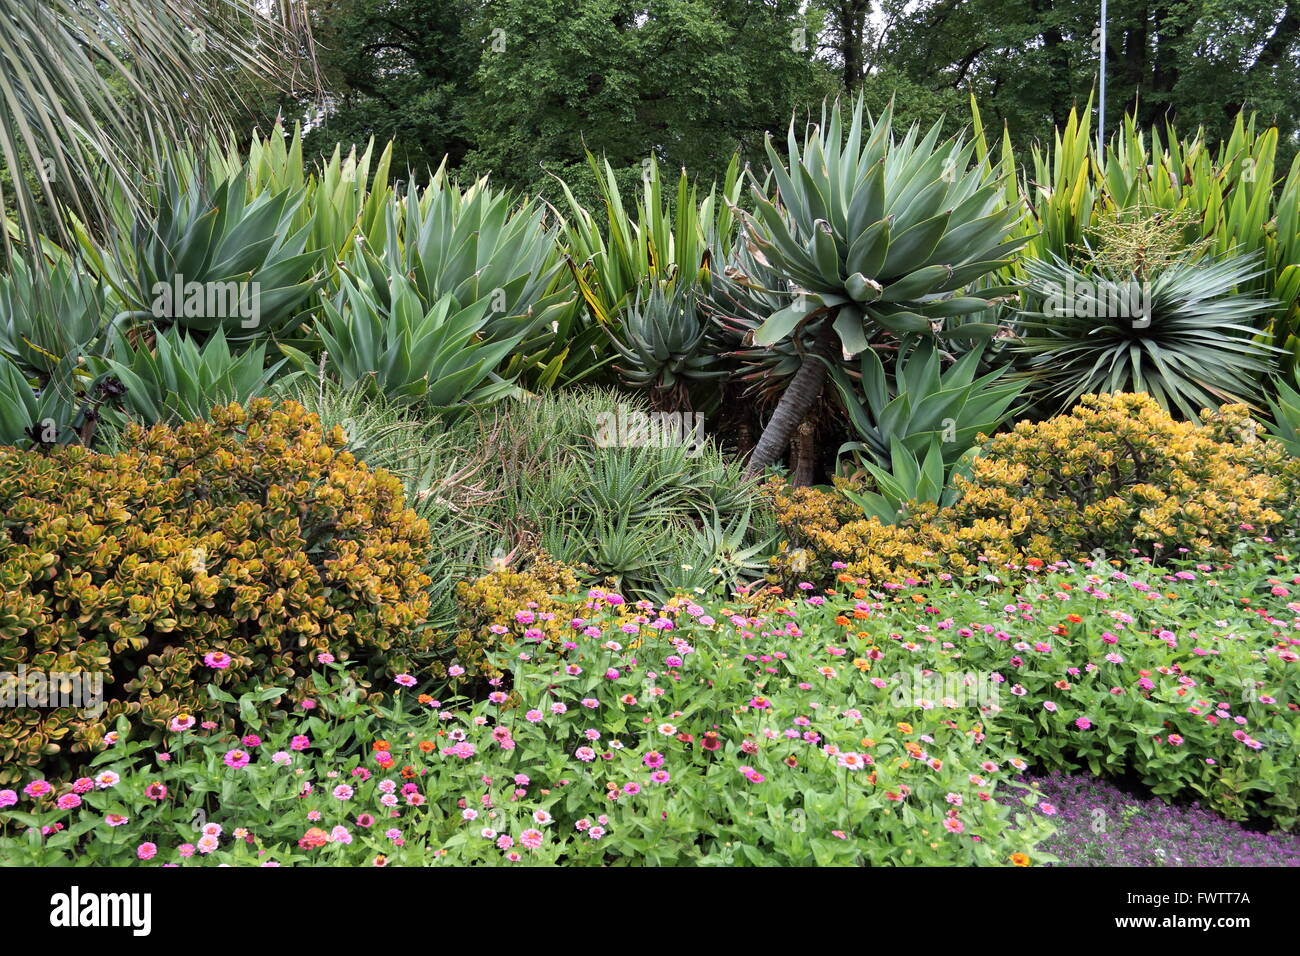 Group of desert plants like Agave, Aloe vera, Native Gymea Lily and Jade plant at Fitzroy Garden Melbourne Victoria Australia Stock Photo